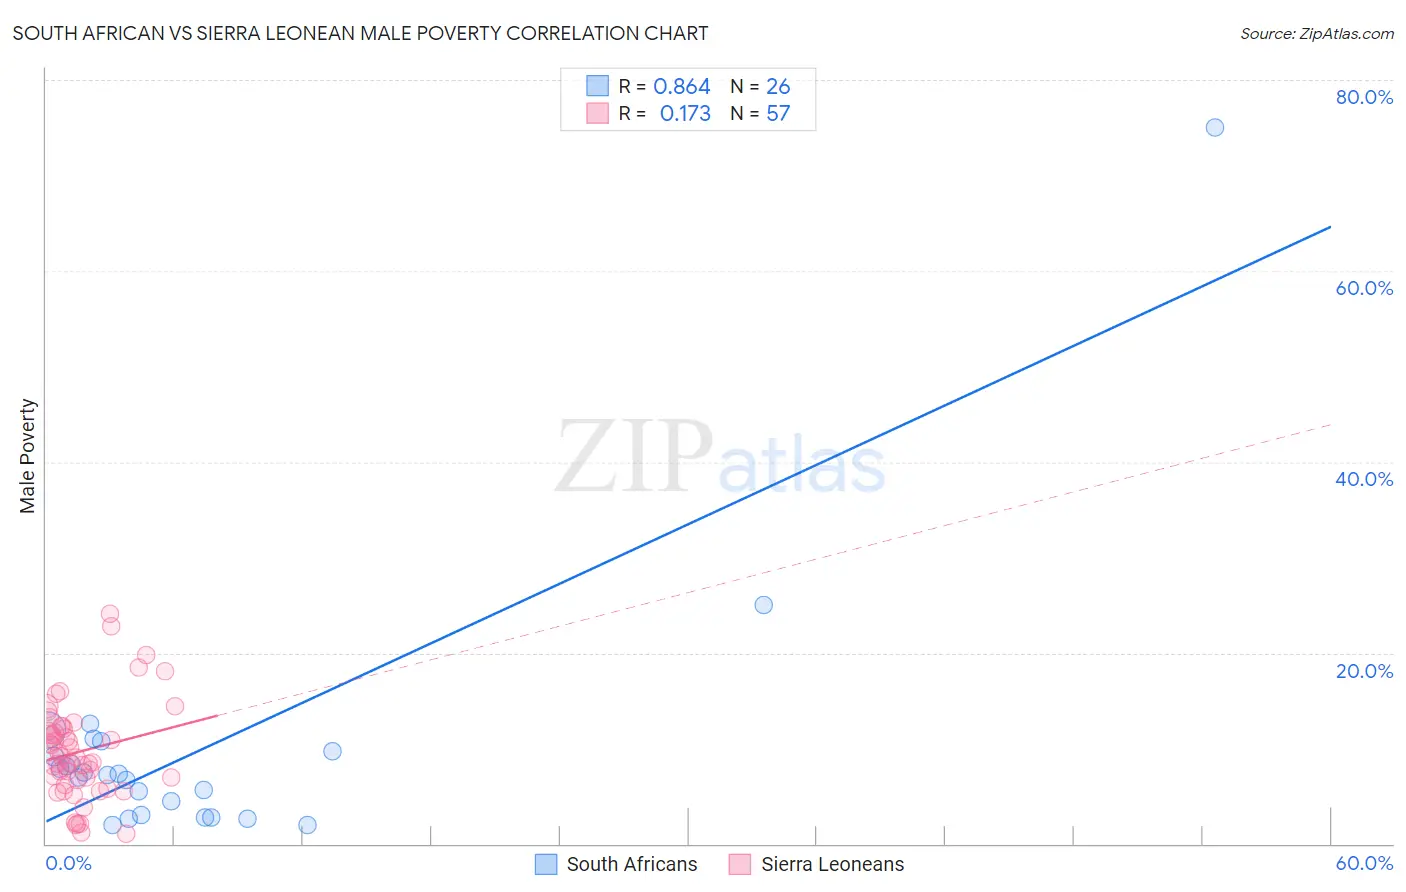 South African vs Sierra Leonean Male Poverty